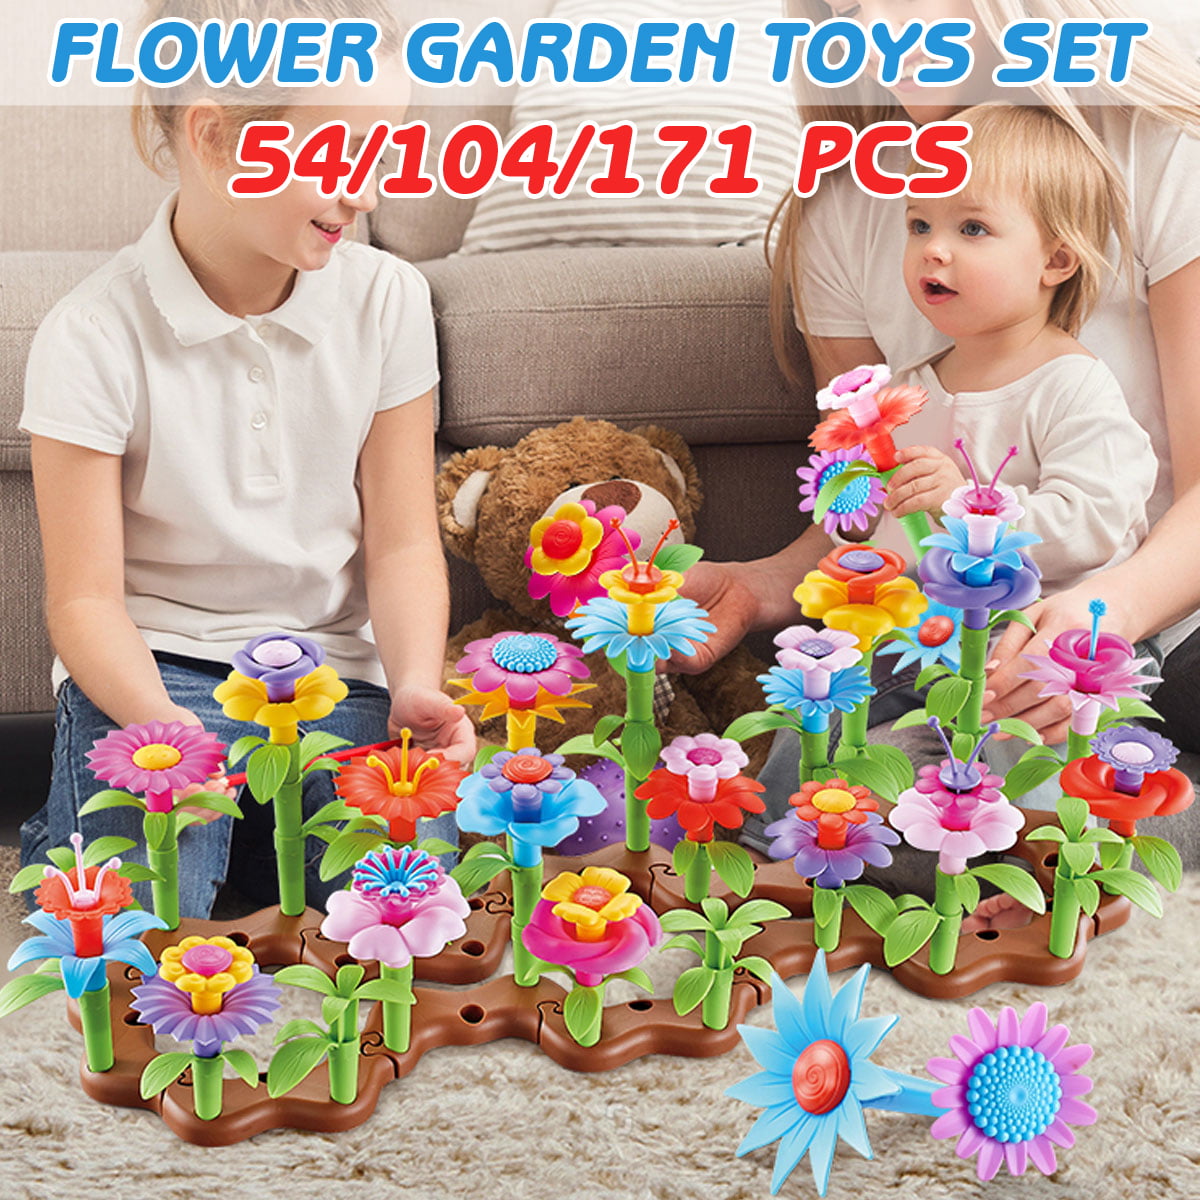 dmazing Toys for 3-8 Year Old Girls Toddlers Flower Garden Building Toys Garden 